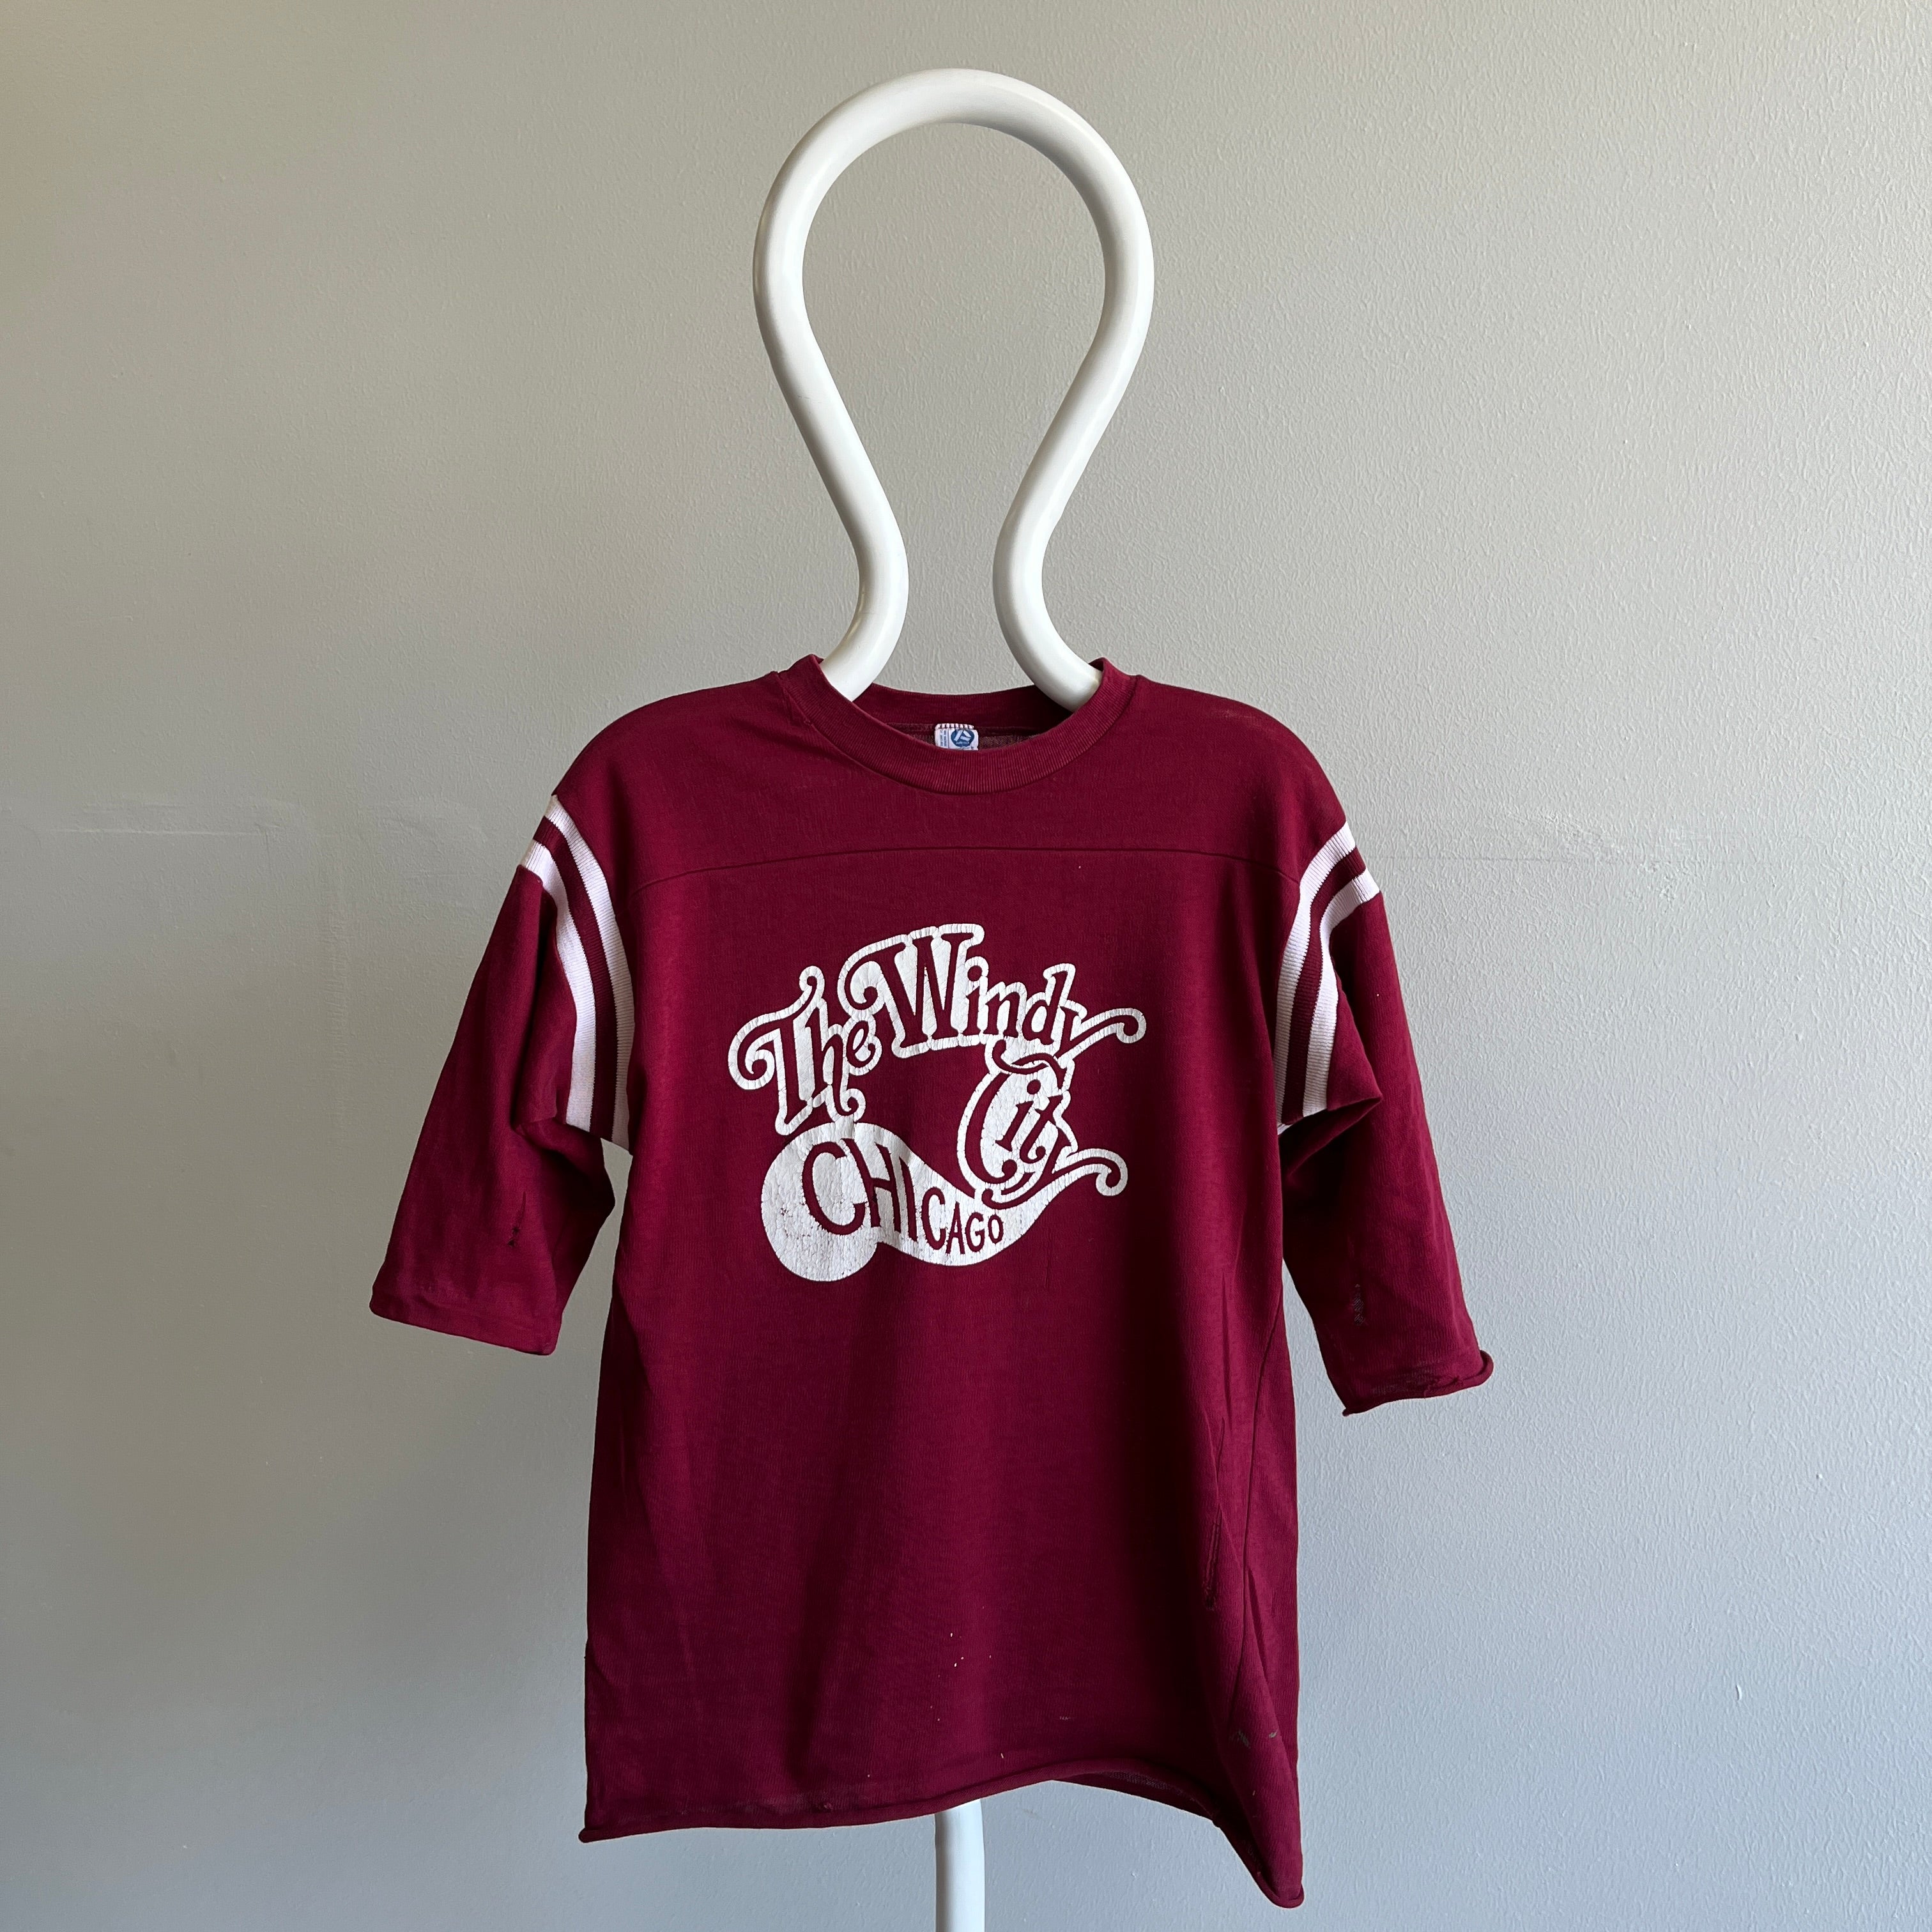 1970s The Windy City Chicago Football Style T-Shirt by Artex